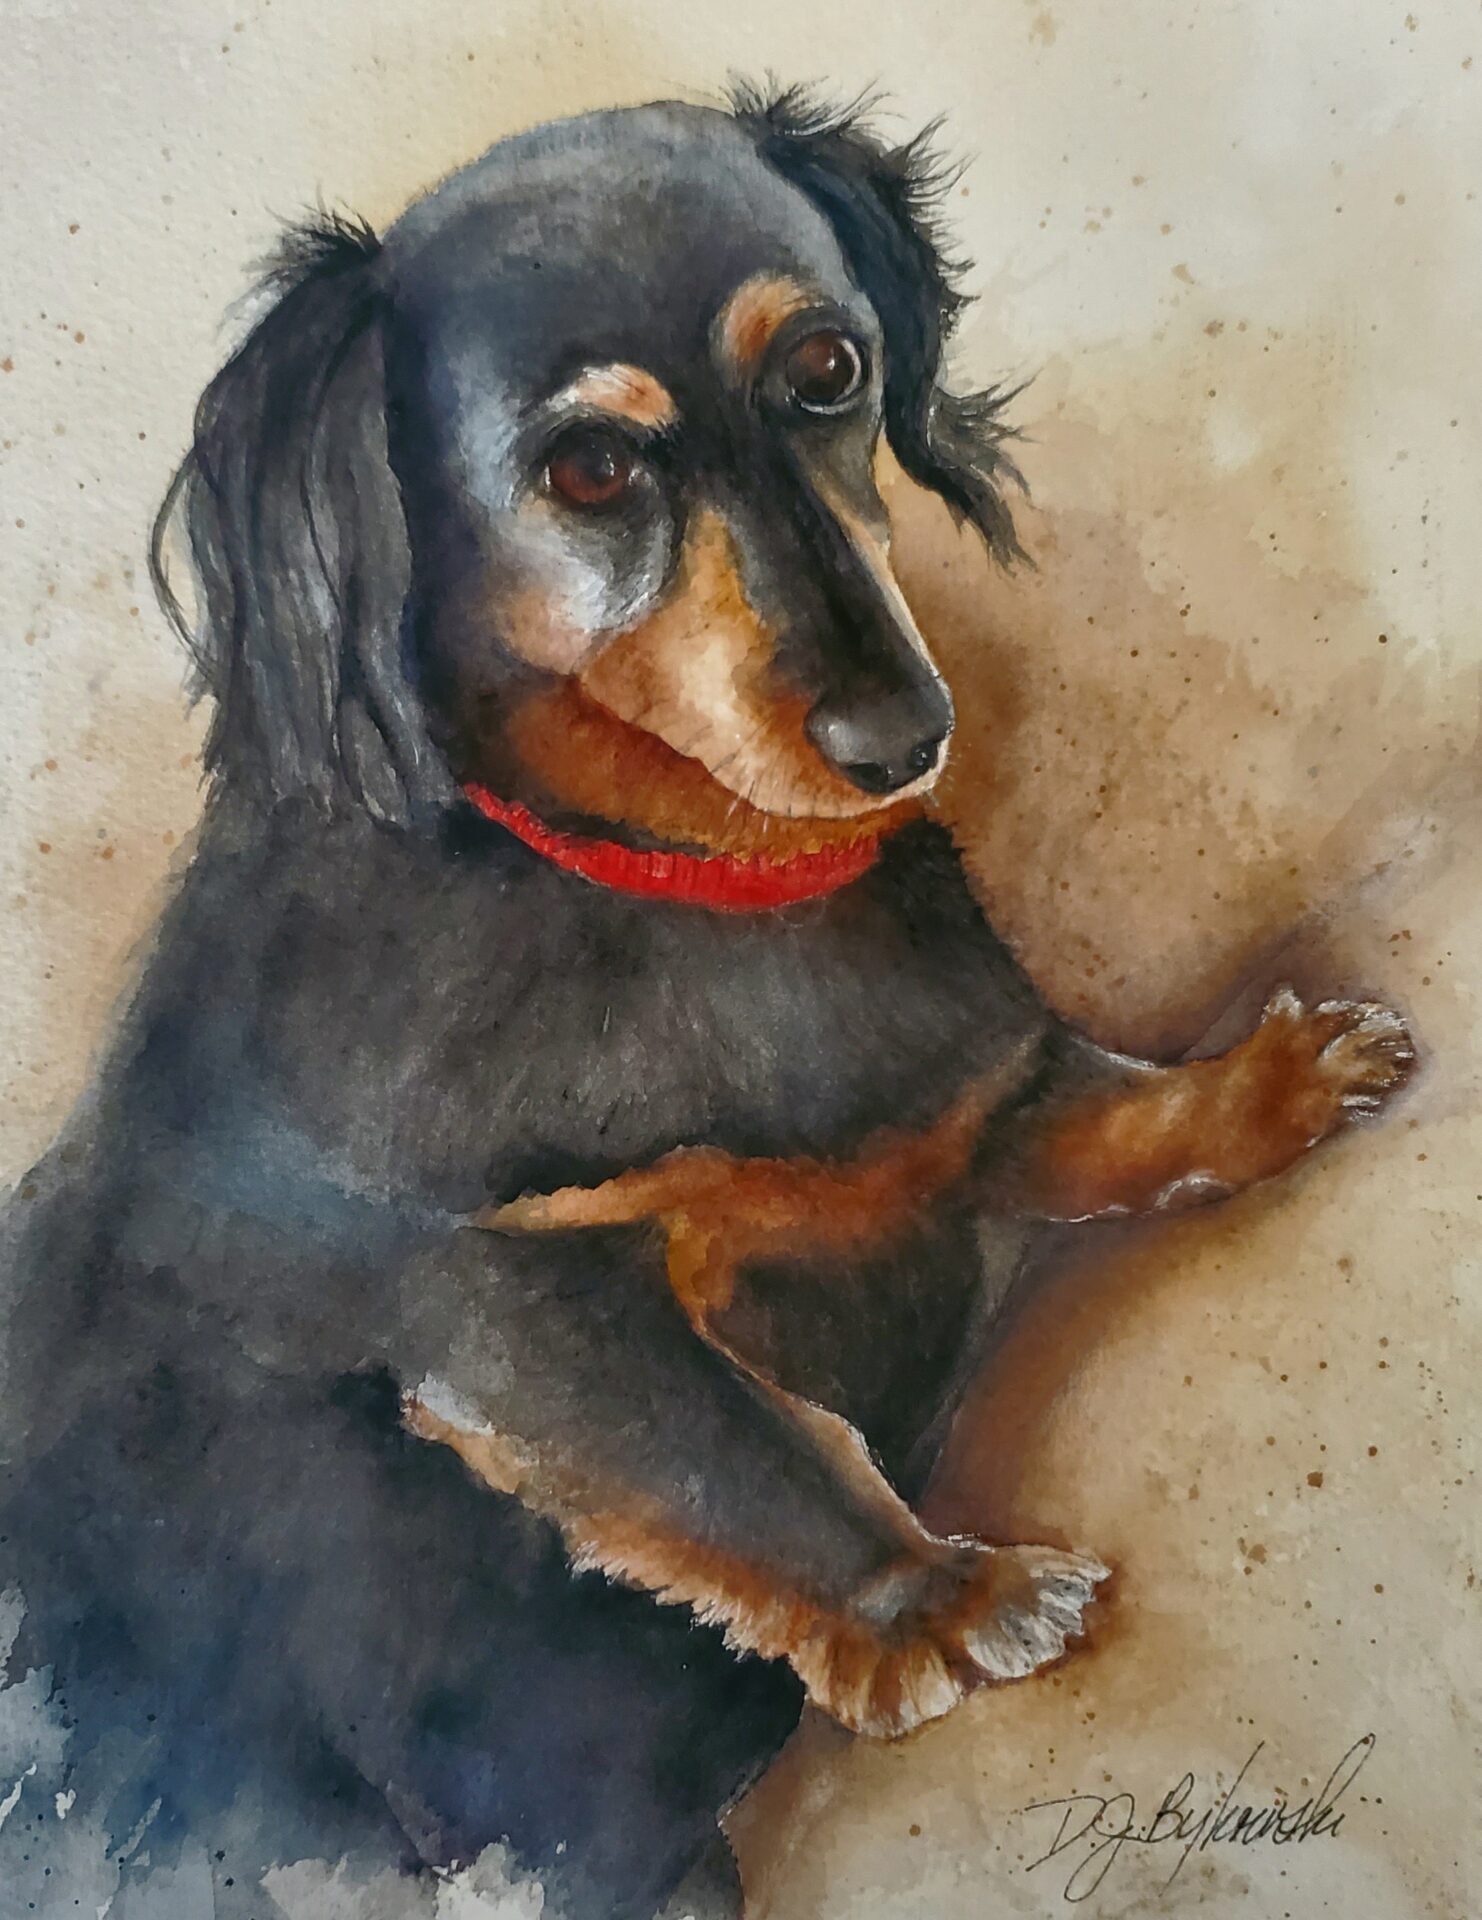 Closeup shot of painting art of a black and brown dog